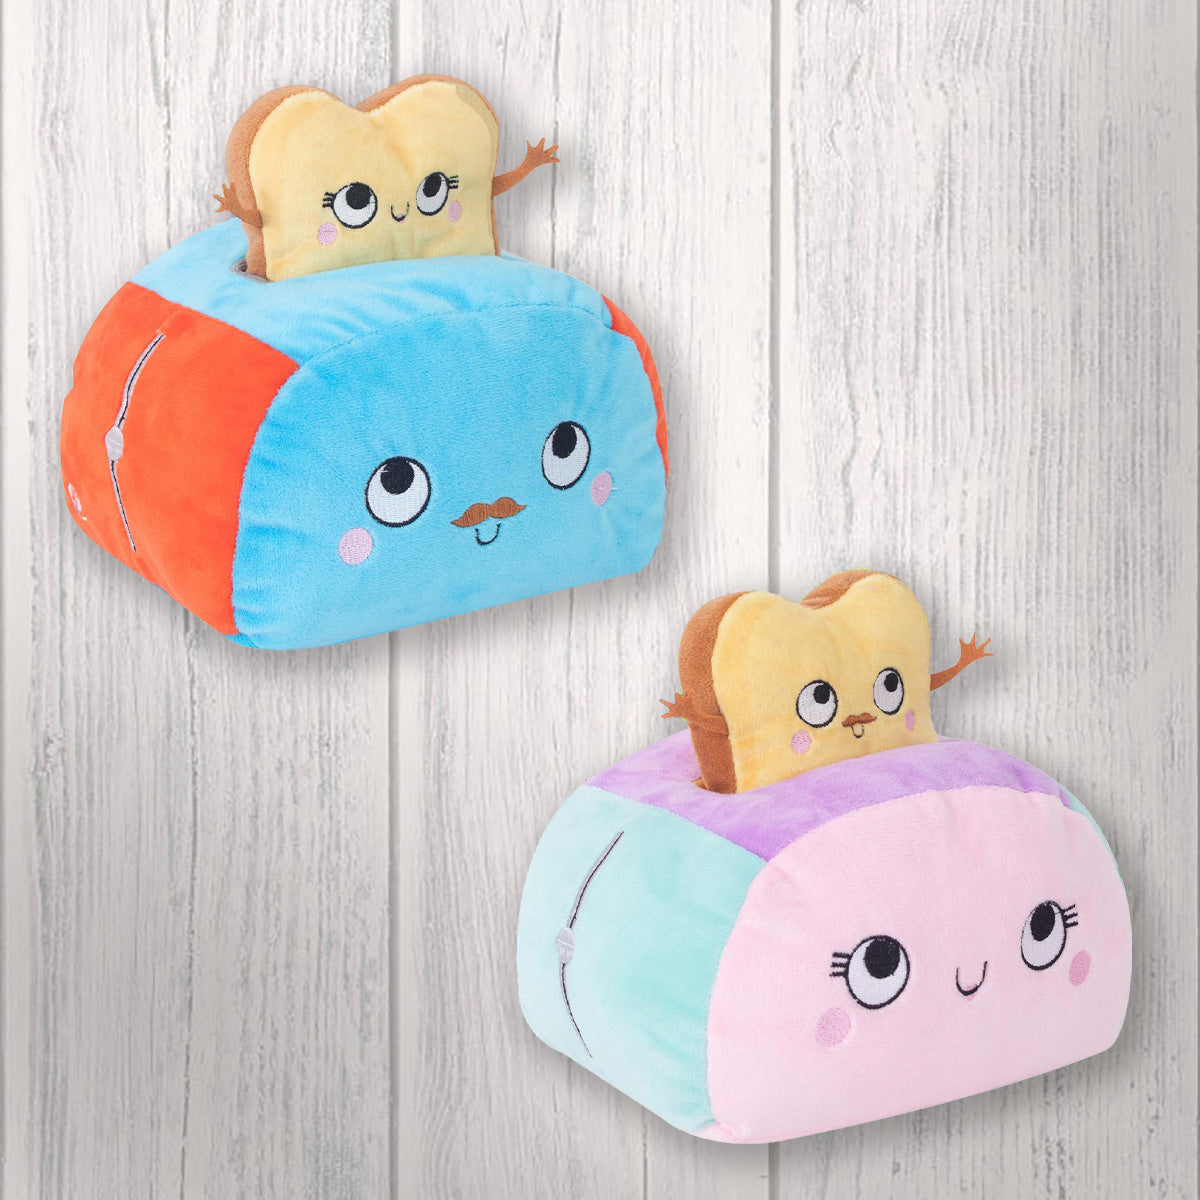 2 in 1 Plush Toaster Toy